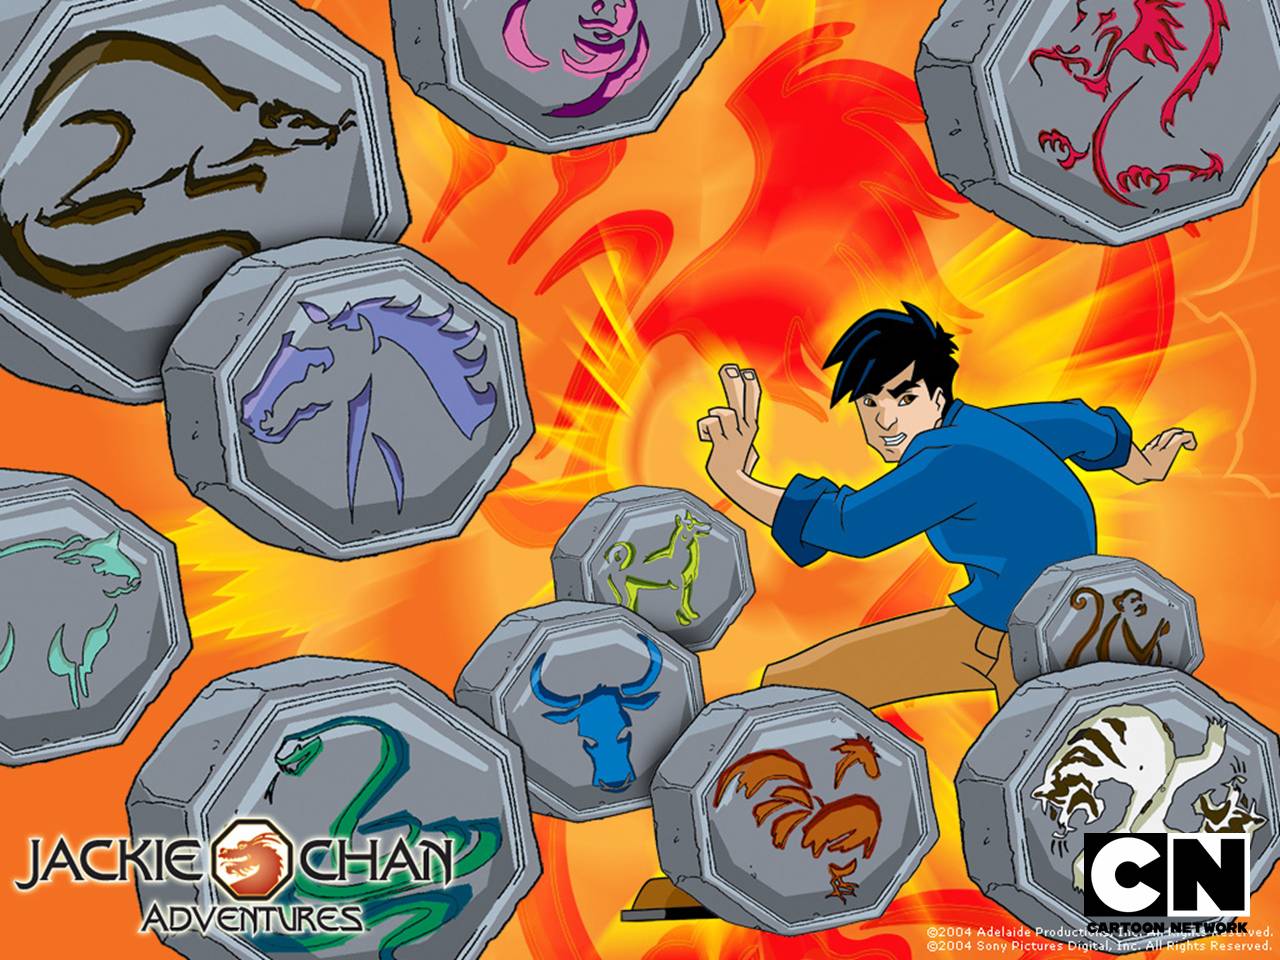 jackie-chan-adventures-season-2-4-discs-by-jackie-chan-amazon-in